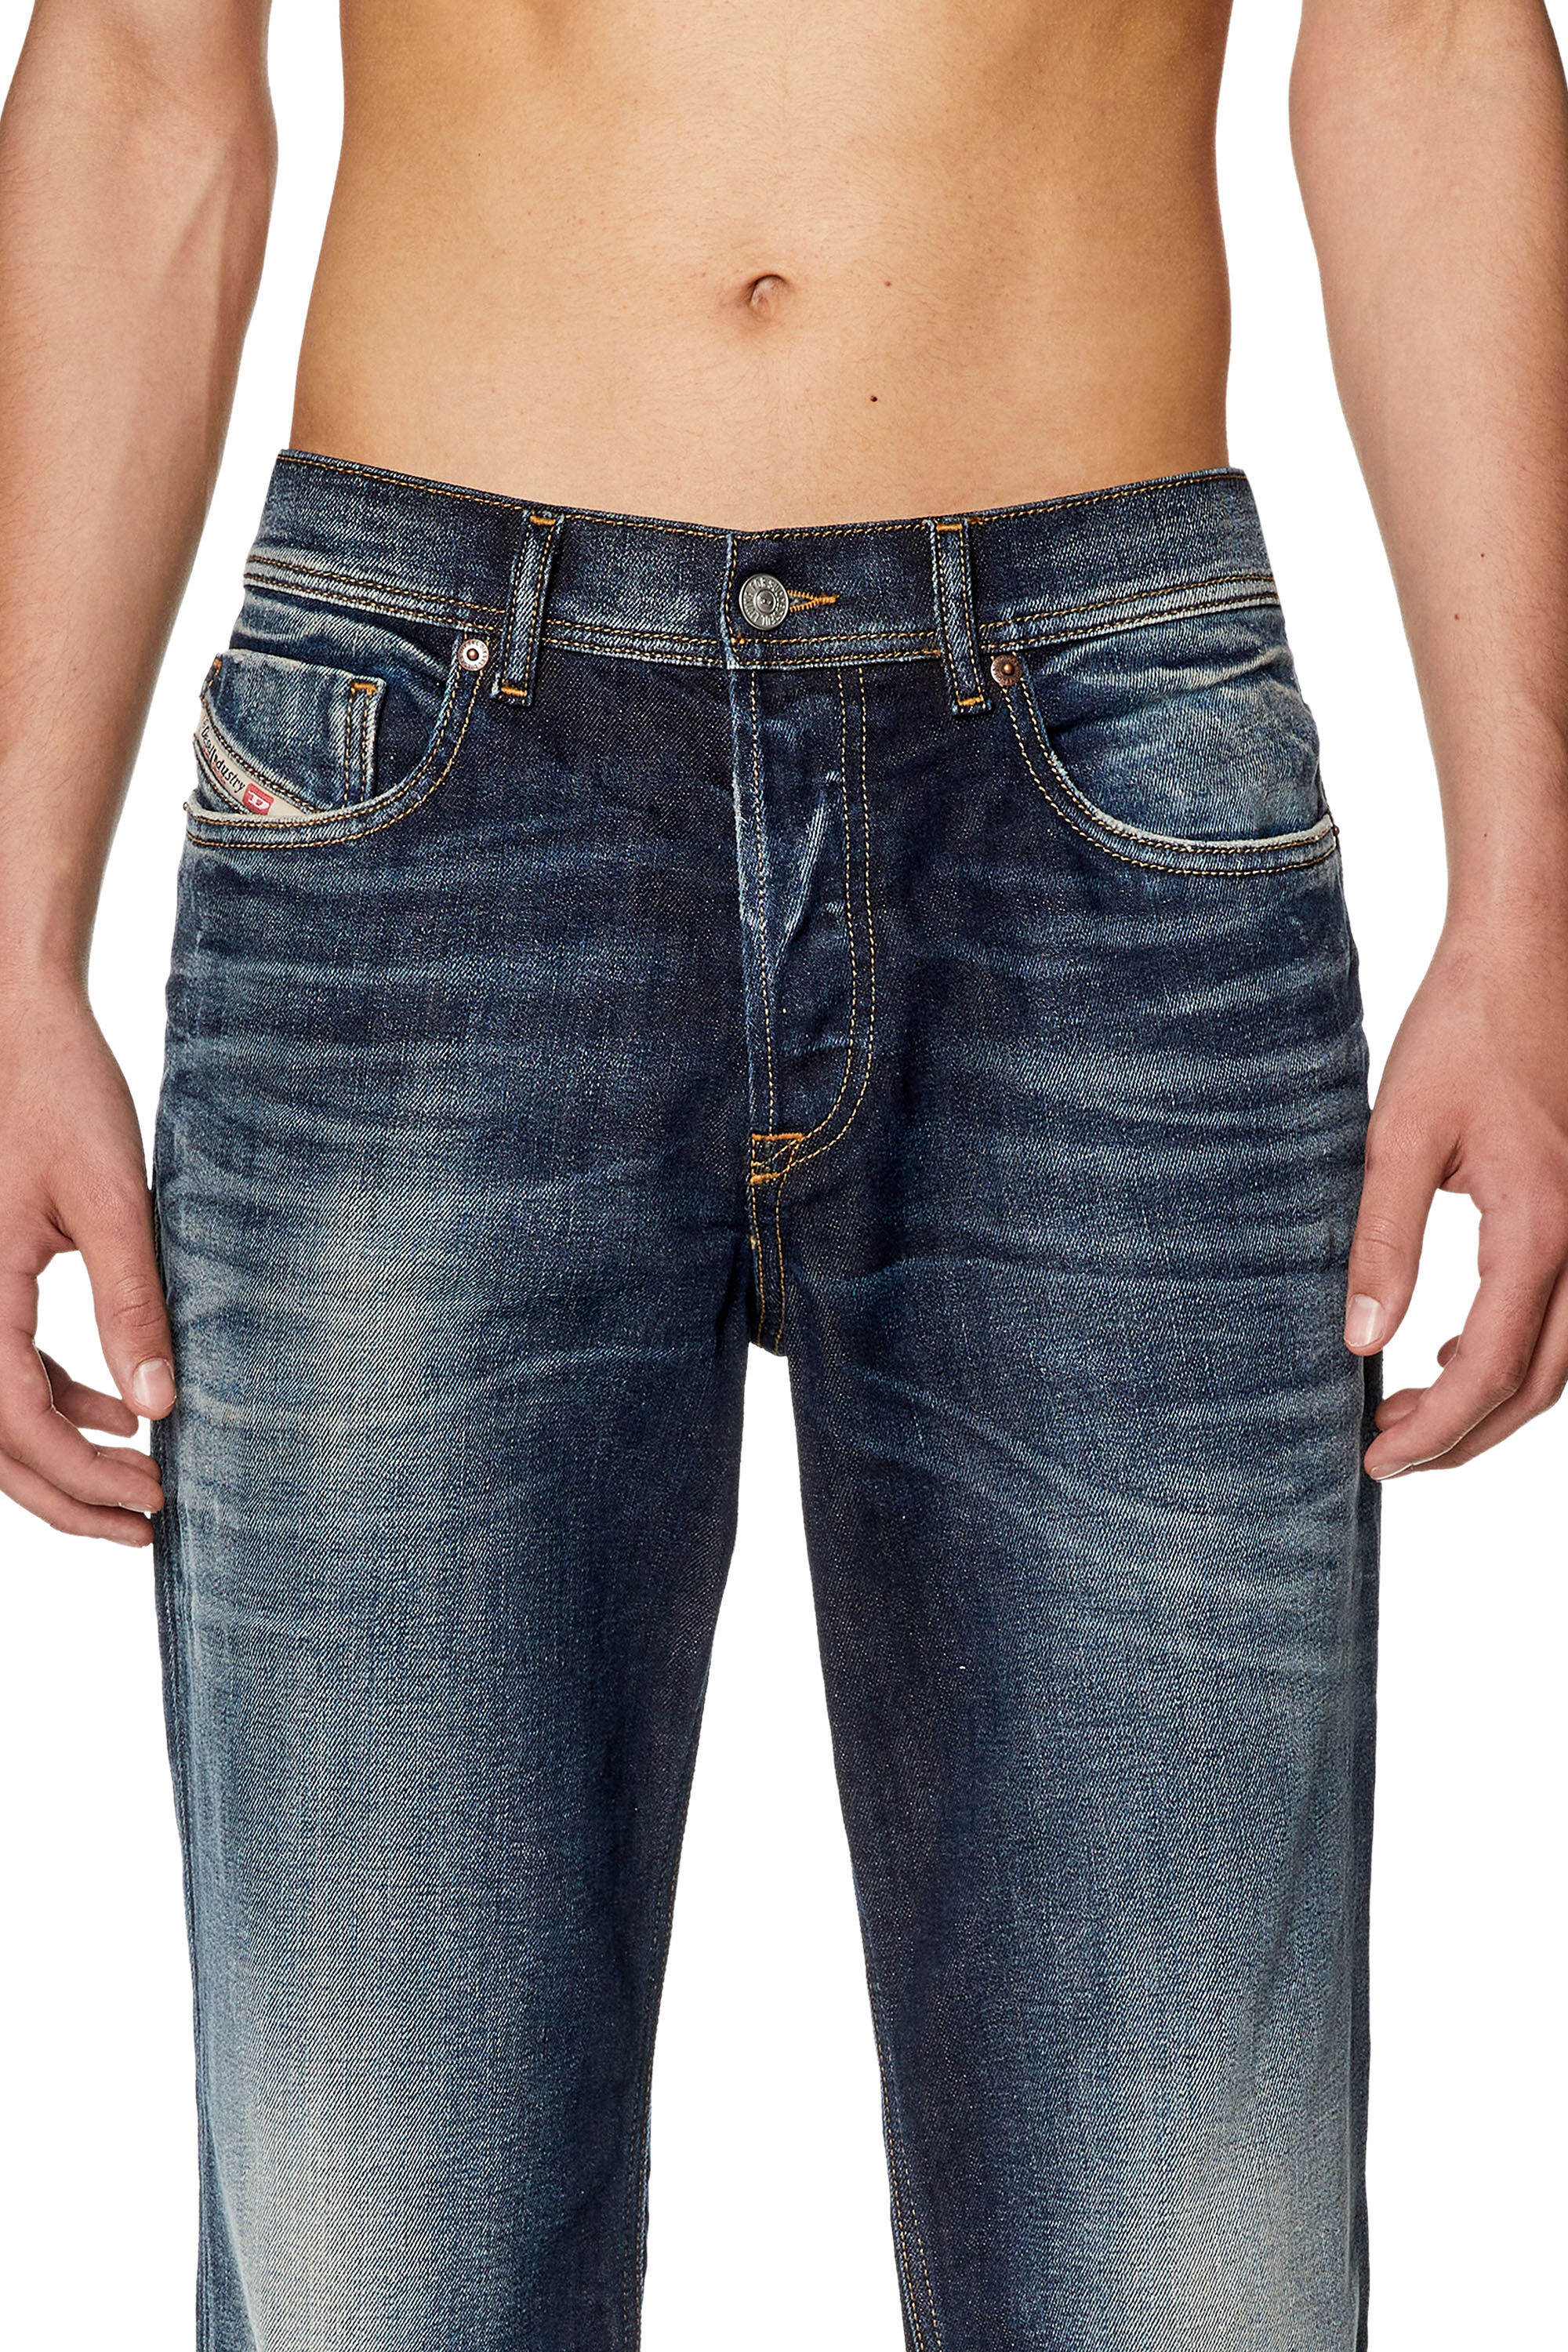 Women's Mid Rise Jean - Slim Tapered Fit - Rugged Flex®, Coming Soon